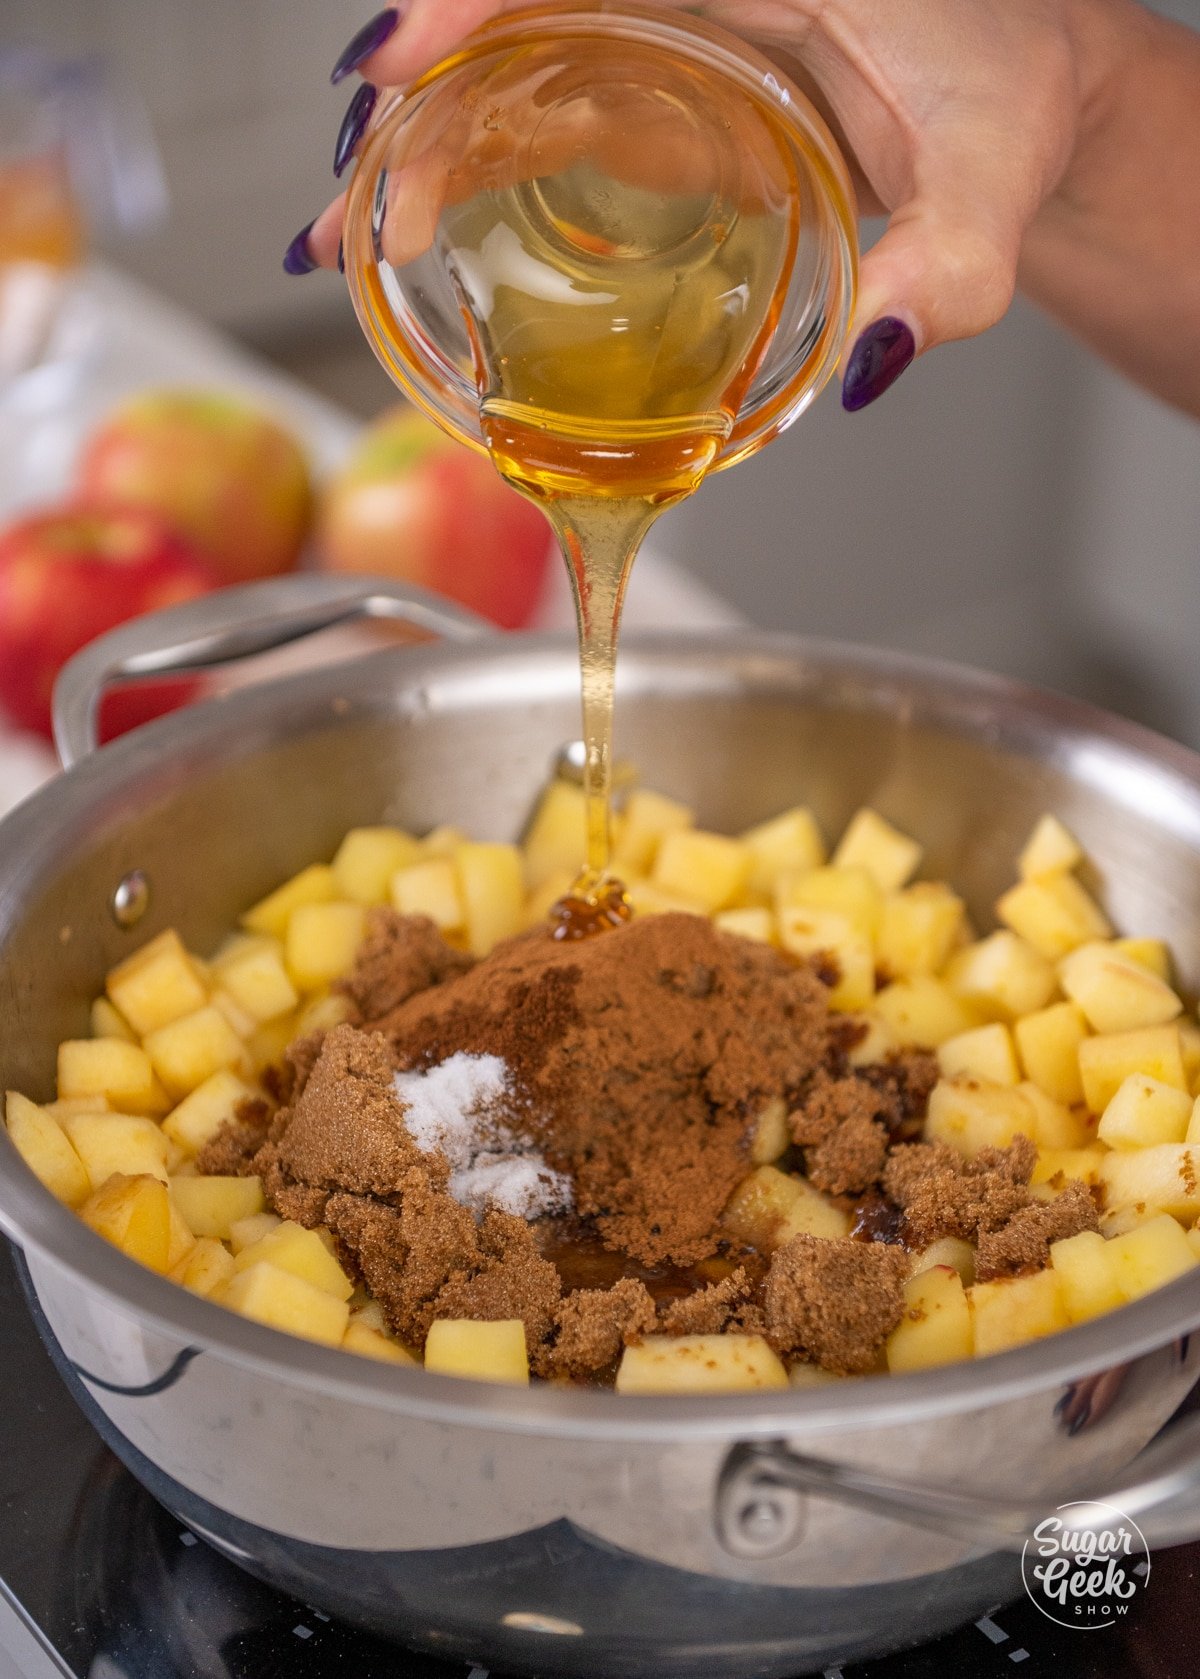 hand adding honey to apples with sugar and spices in a saucepan.